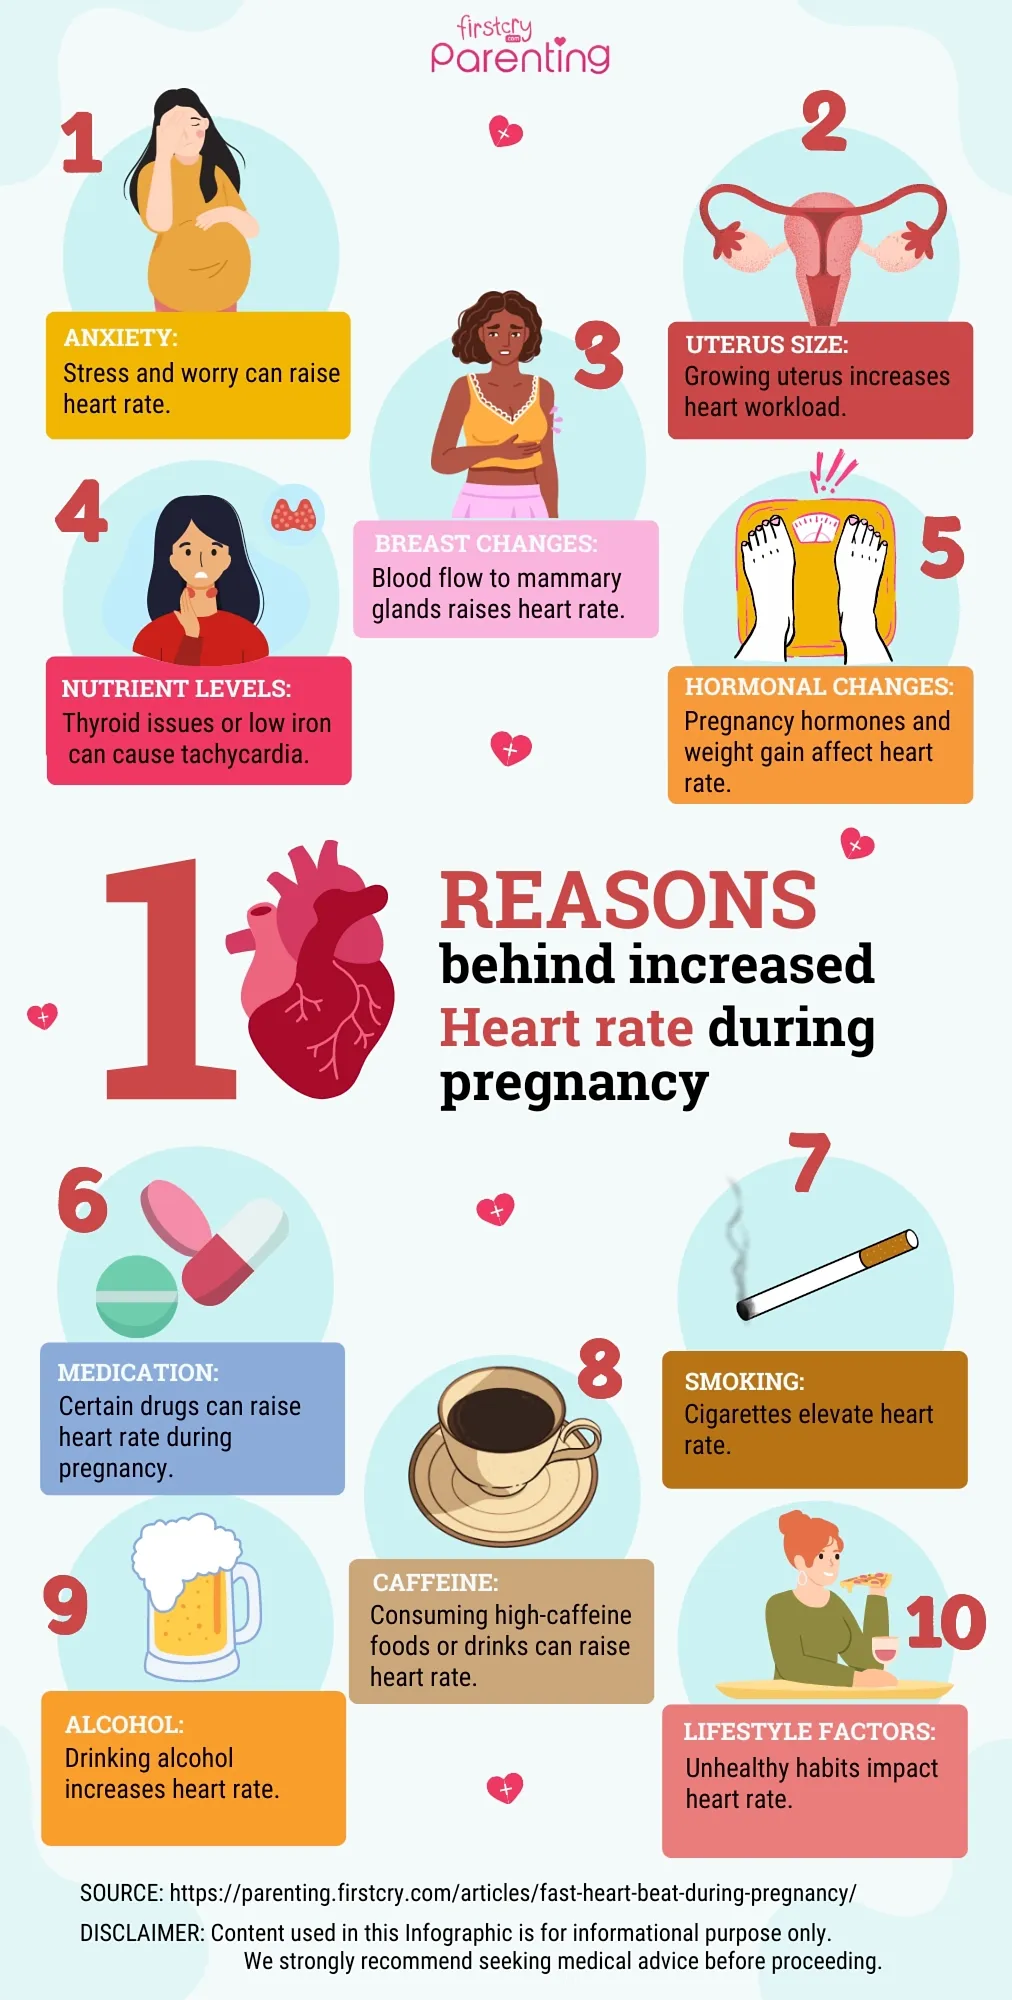 https://cdn.cdnparenting.com/articles/2019/06/18003240/10-Reasons-behind-Increased-Heart-rate-during-Pregnancy-Infographic.webp